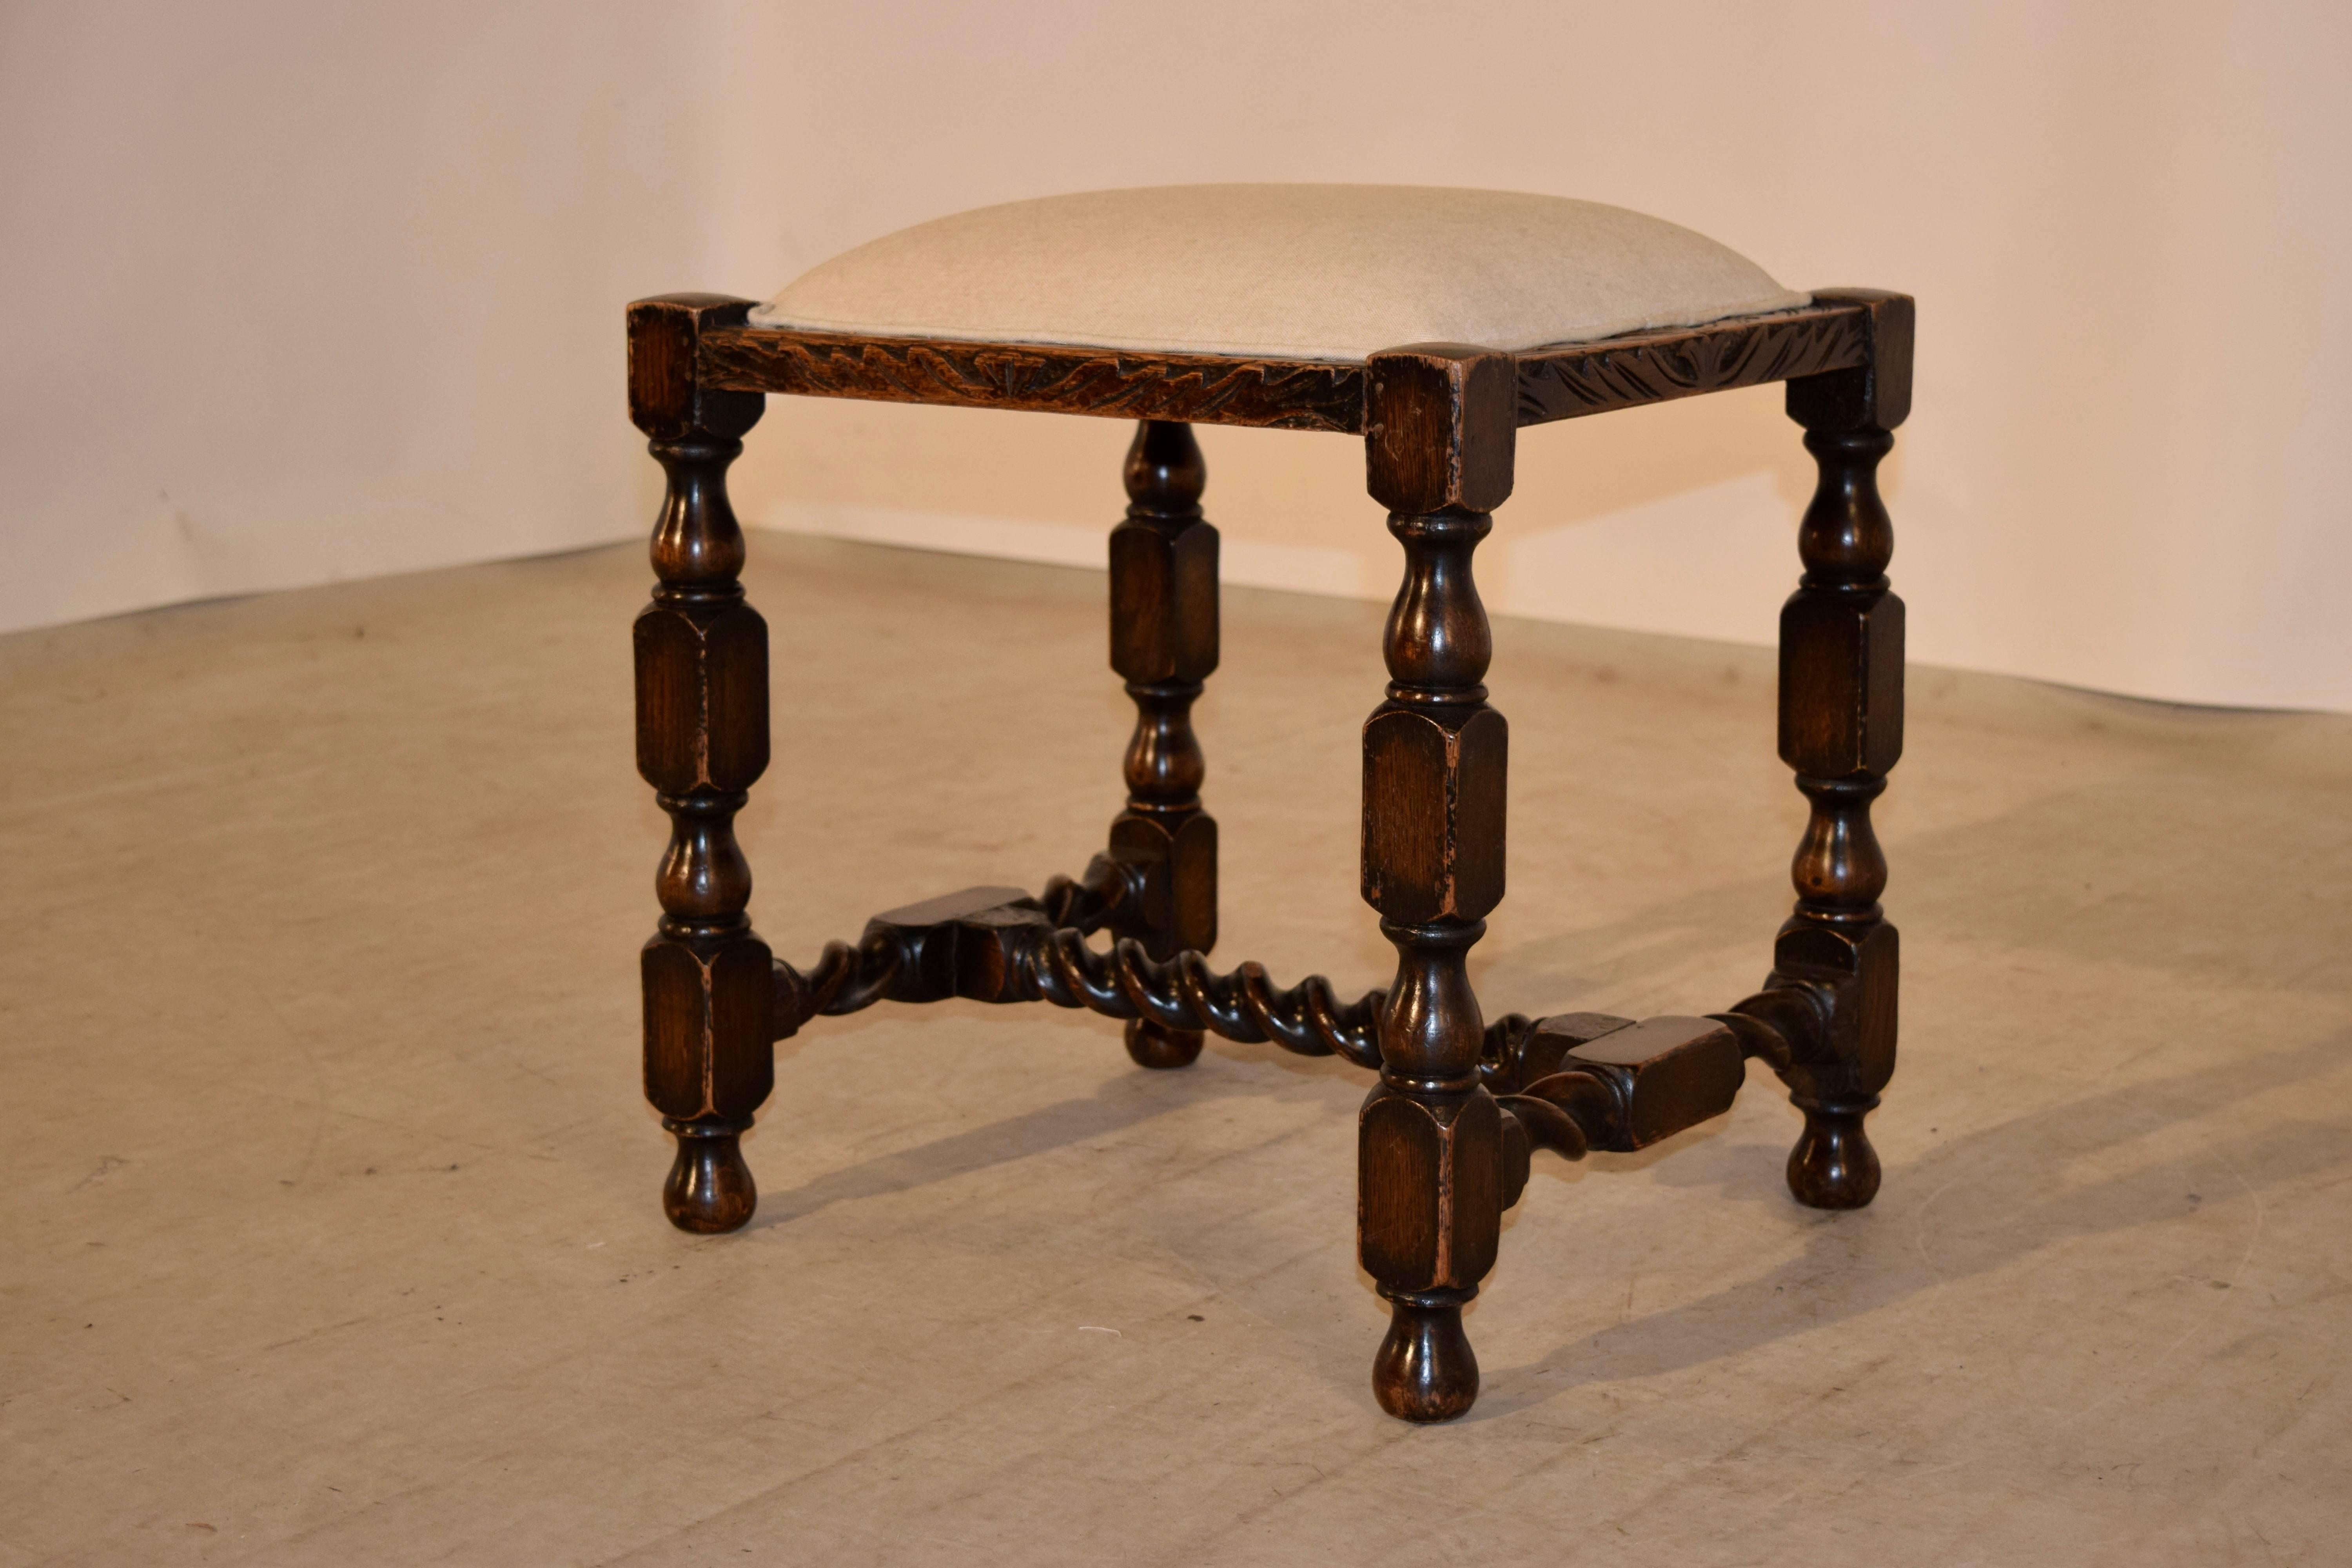 19th century English oak stool with a hand-carved decorated border around the seat, following down to hand turned legs and barley twist stretcher, resting on hand turned feet. The seat has been newly upholstered in linen and finished with single